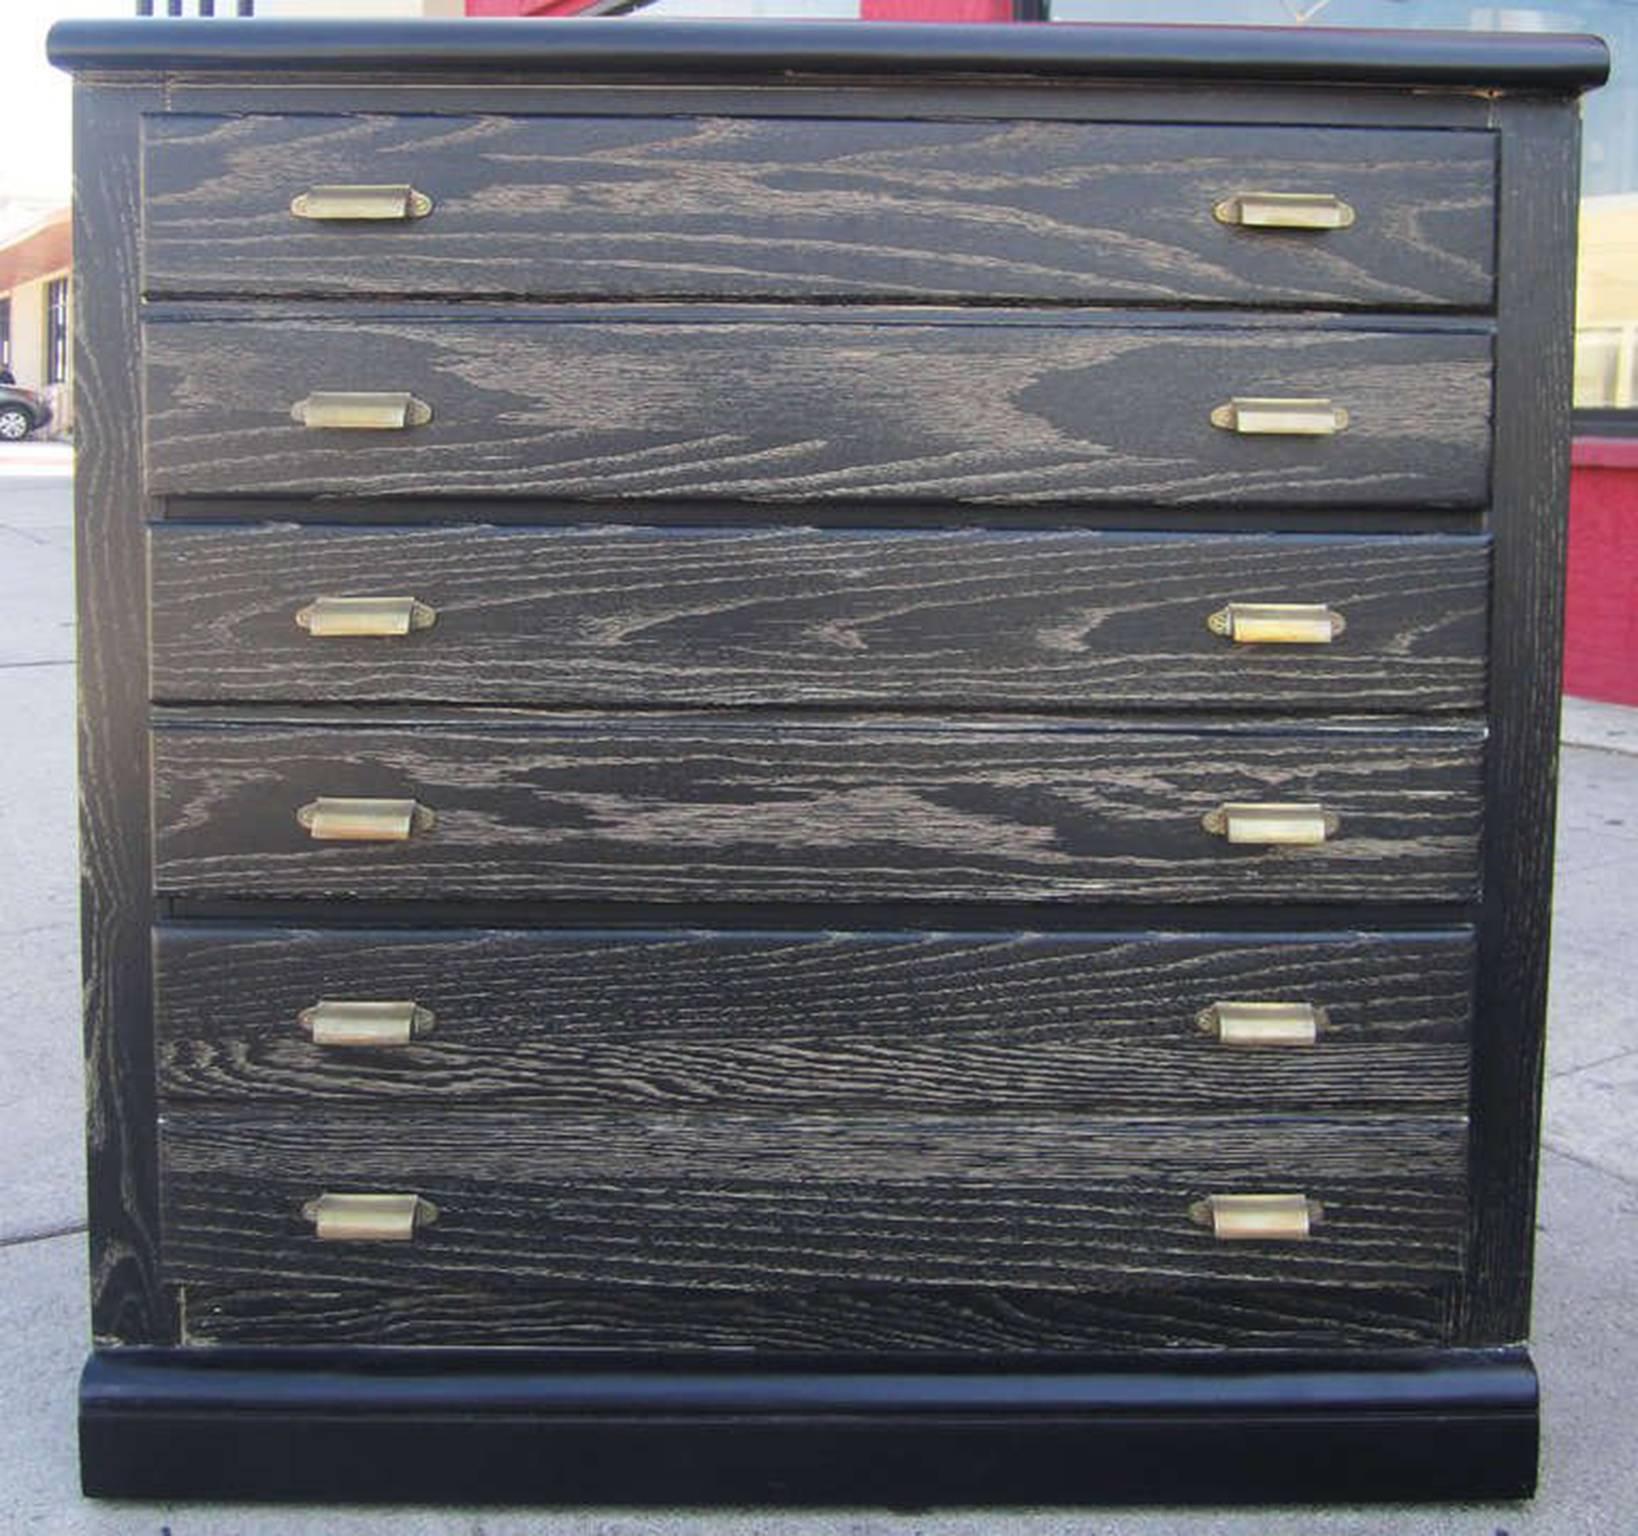 This cerused oak chest of drawers features Classic lines including a cornice and base which protrude slightly from the body of the piece. Because of the twelve scooped brass drawer pulls, the dresser appears to have six narrow drawers, instead every